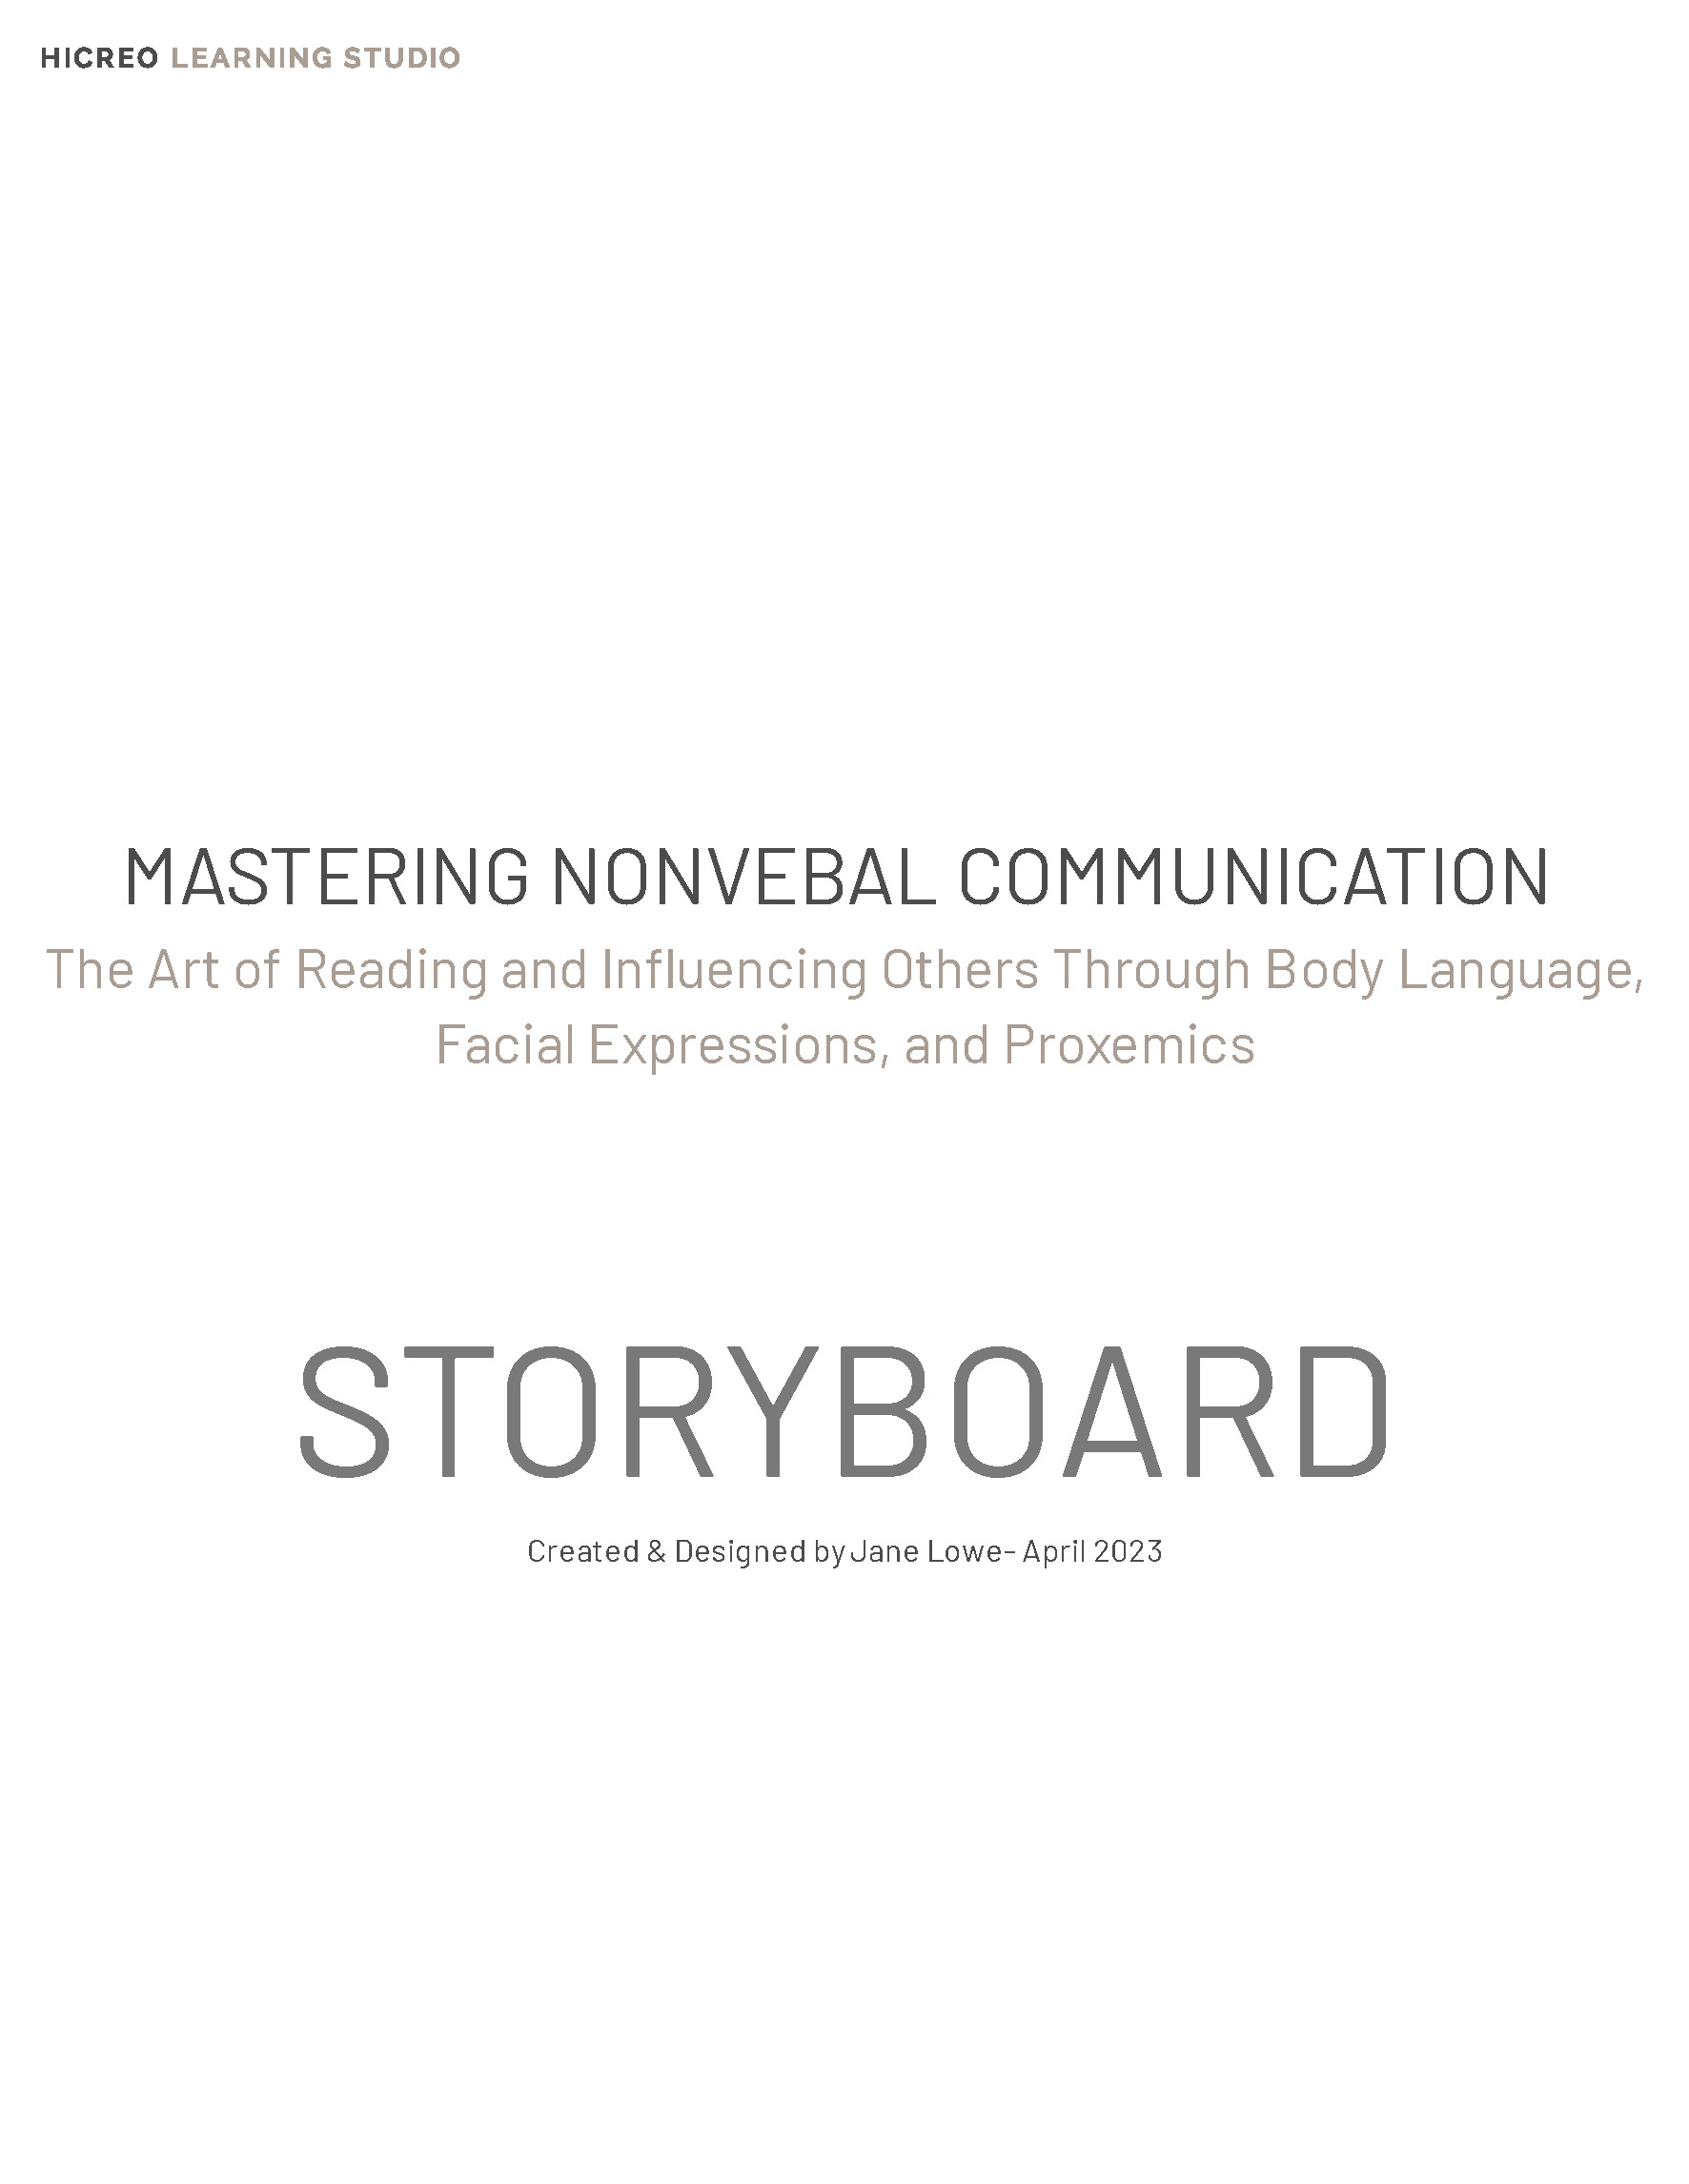 Storyboard template that titled 'Mastering Nonverbal Communication_The Art of Reading and Influencing Others Through Body Language'